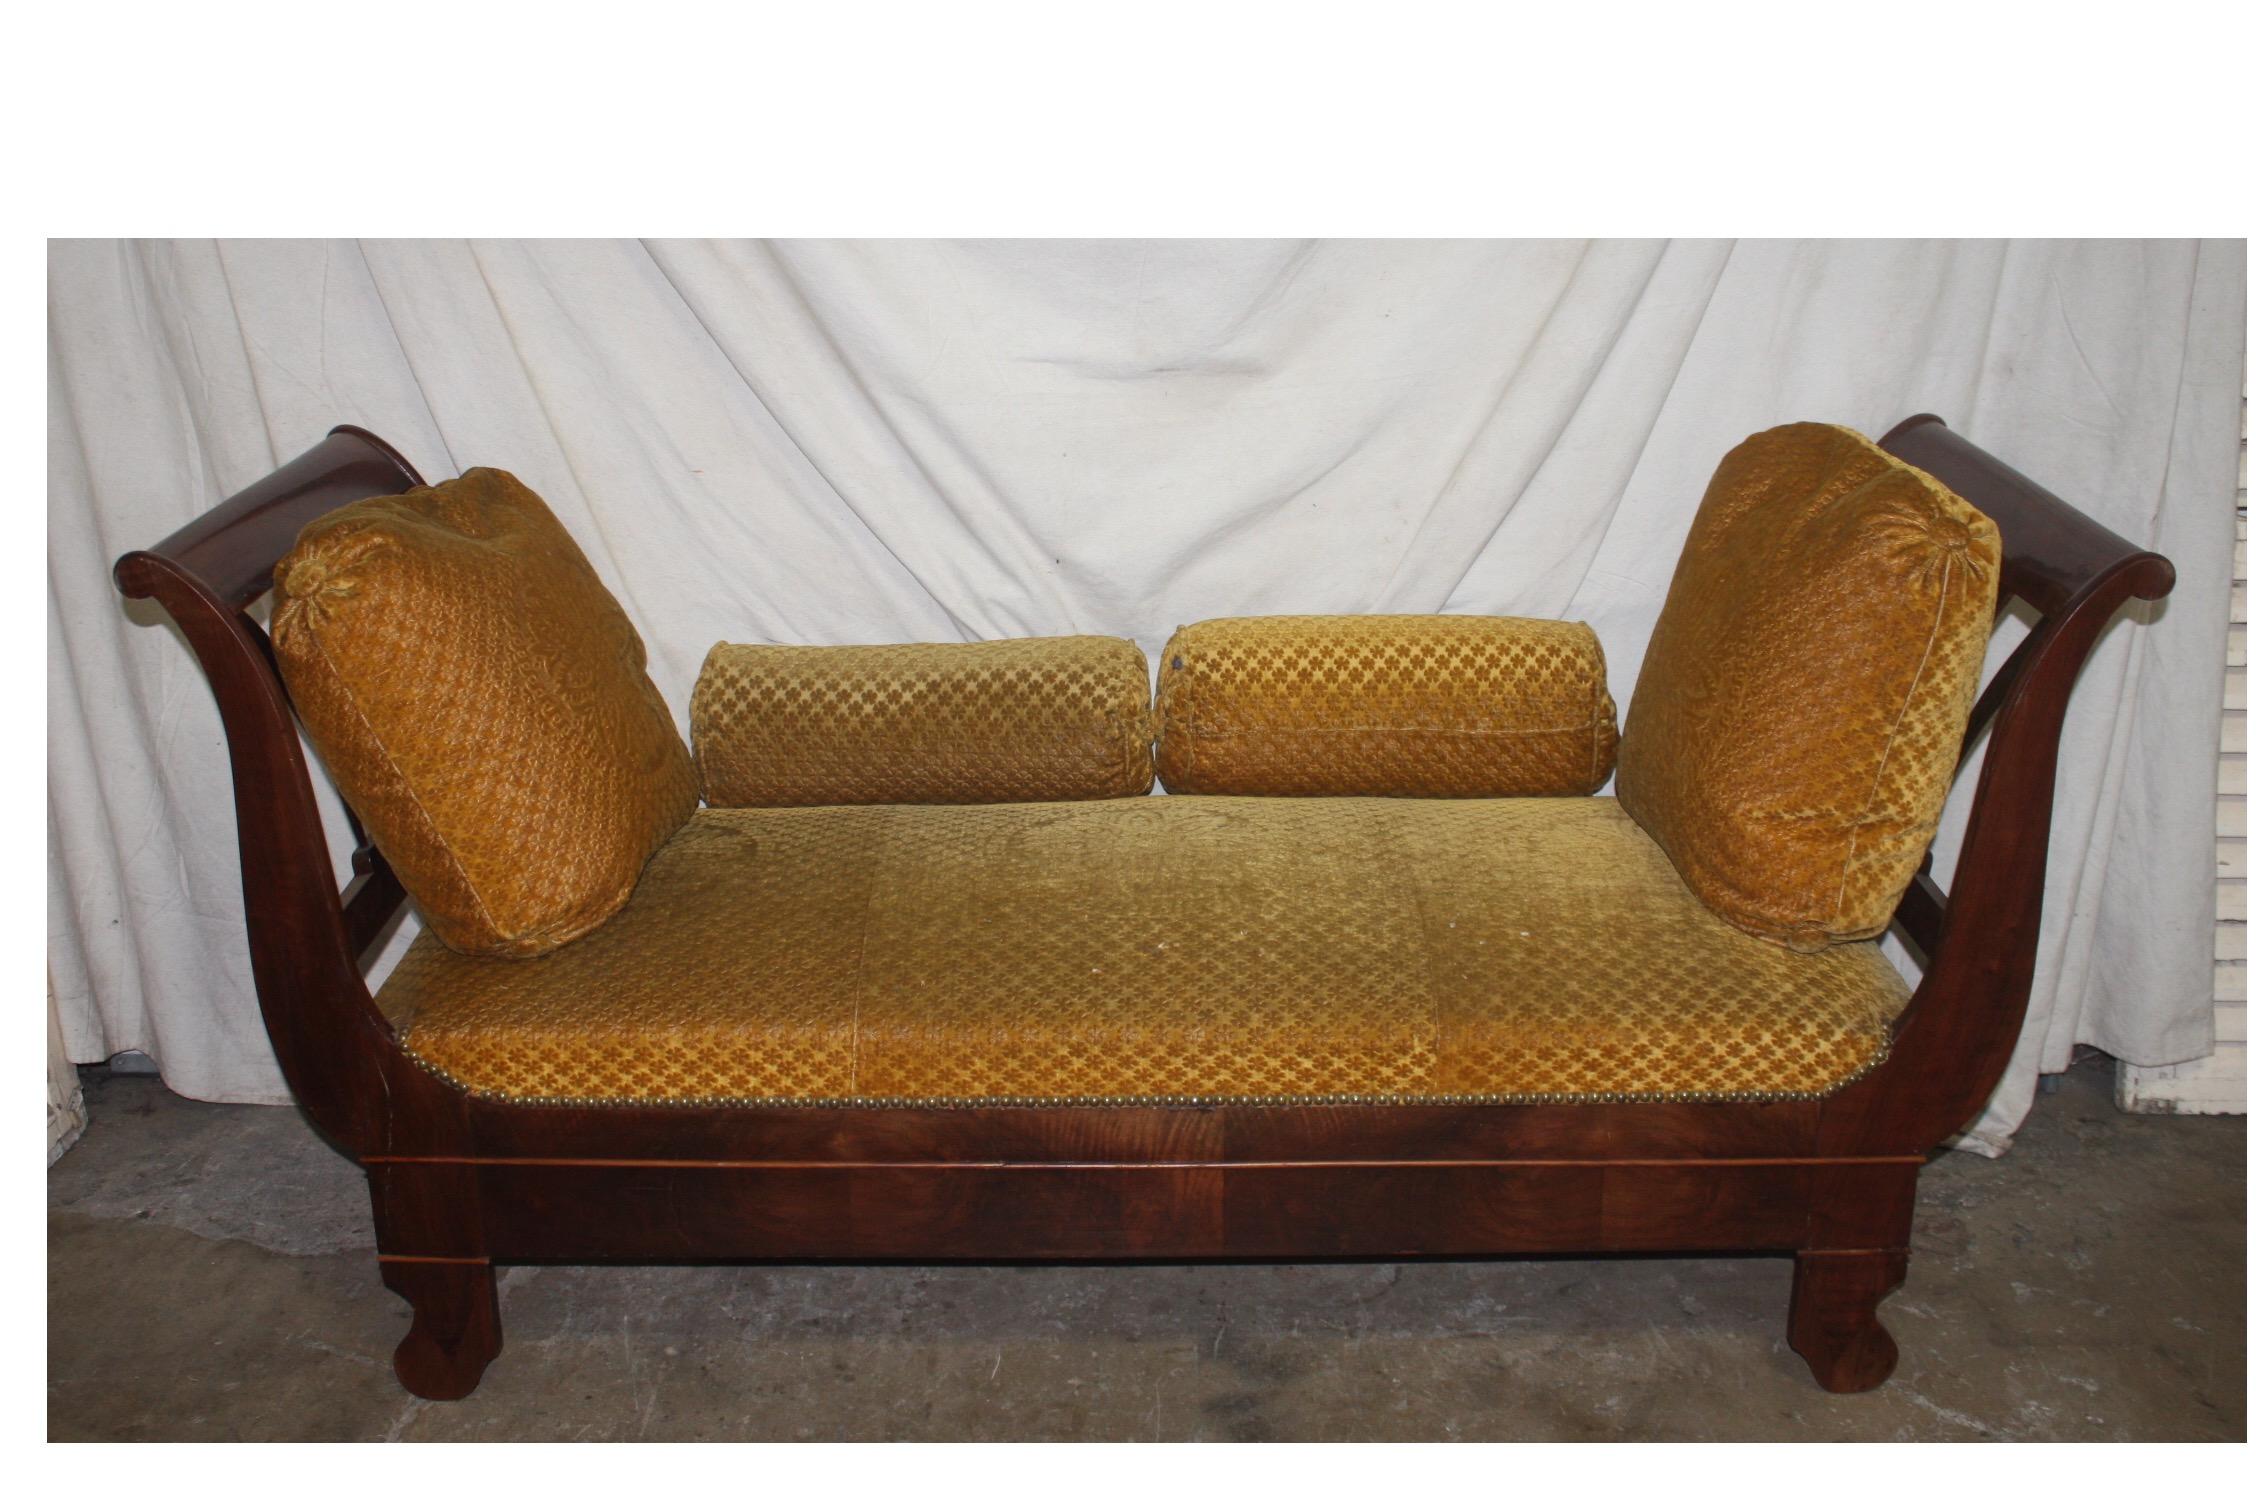 French 19th century daybed.